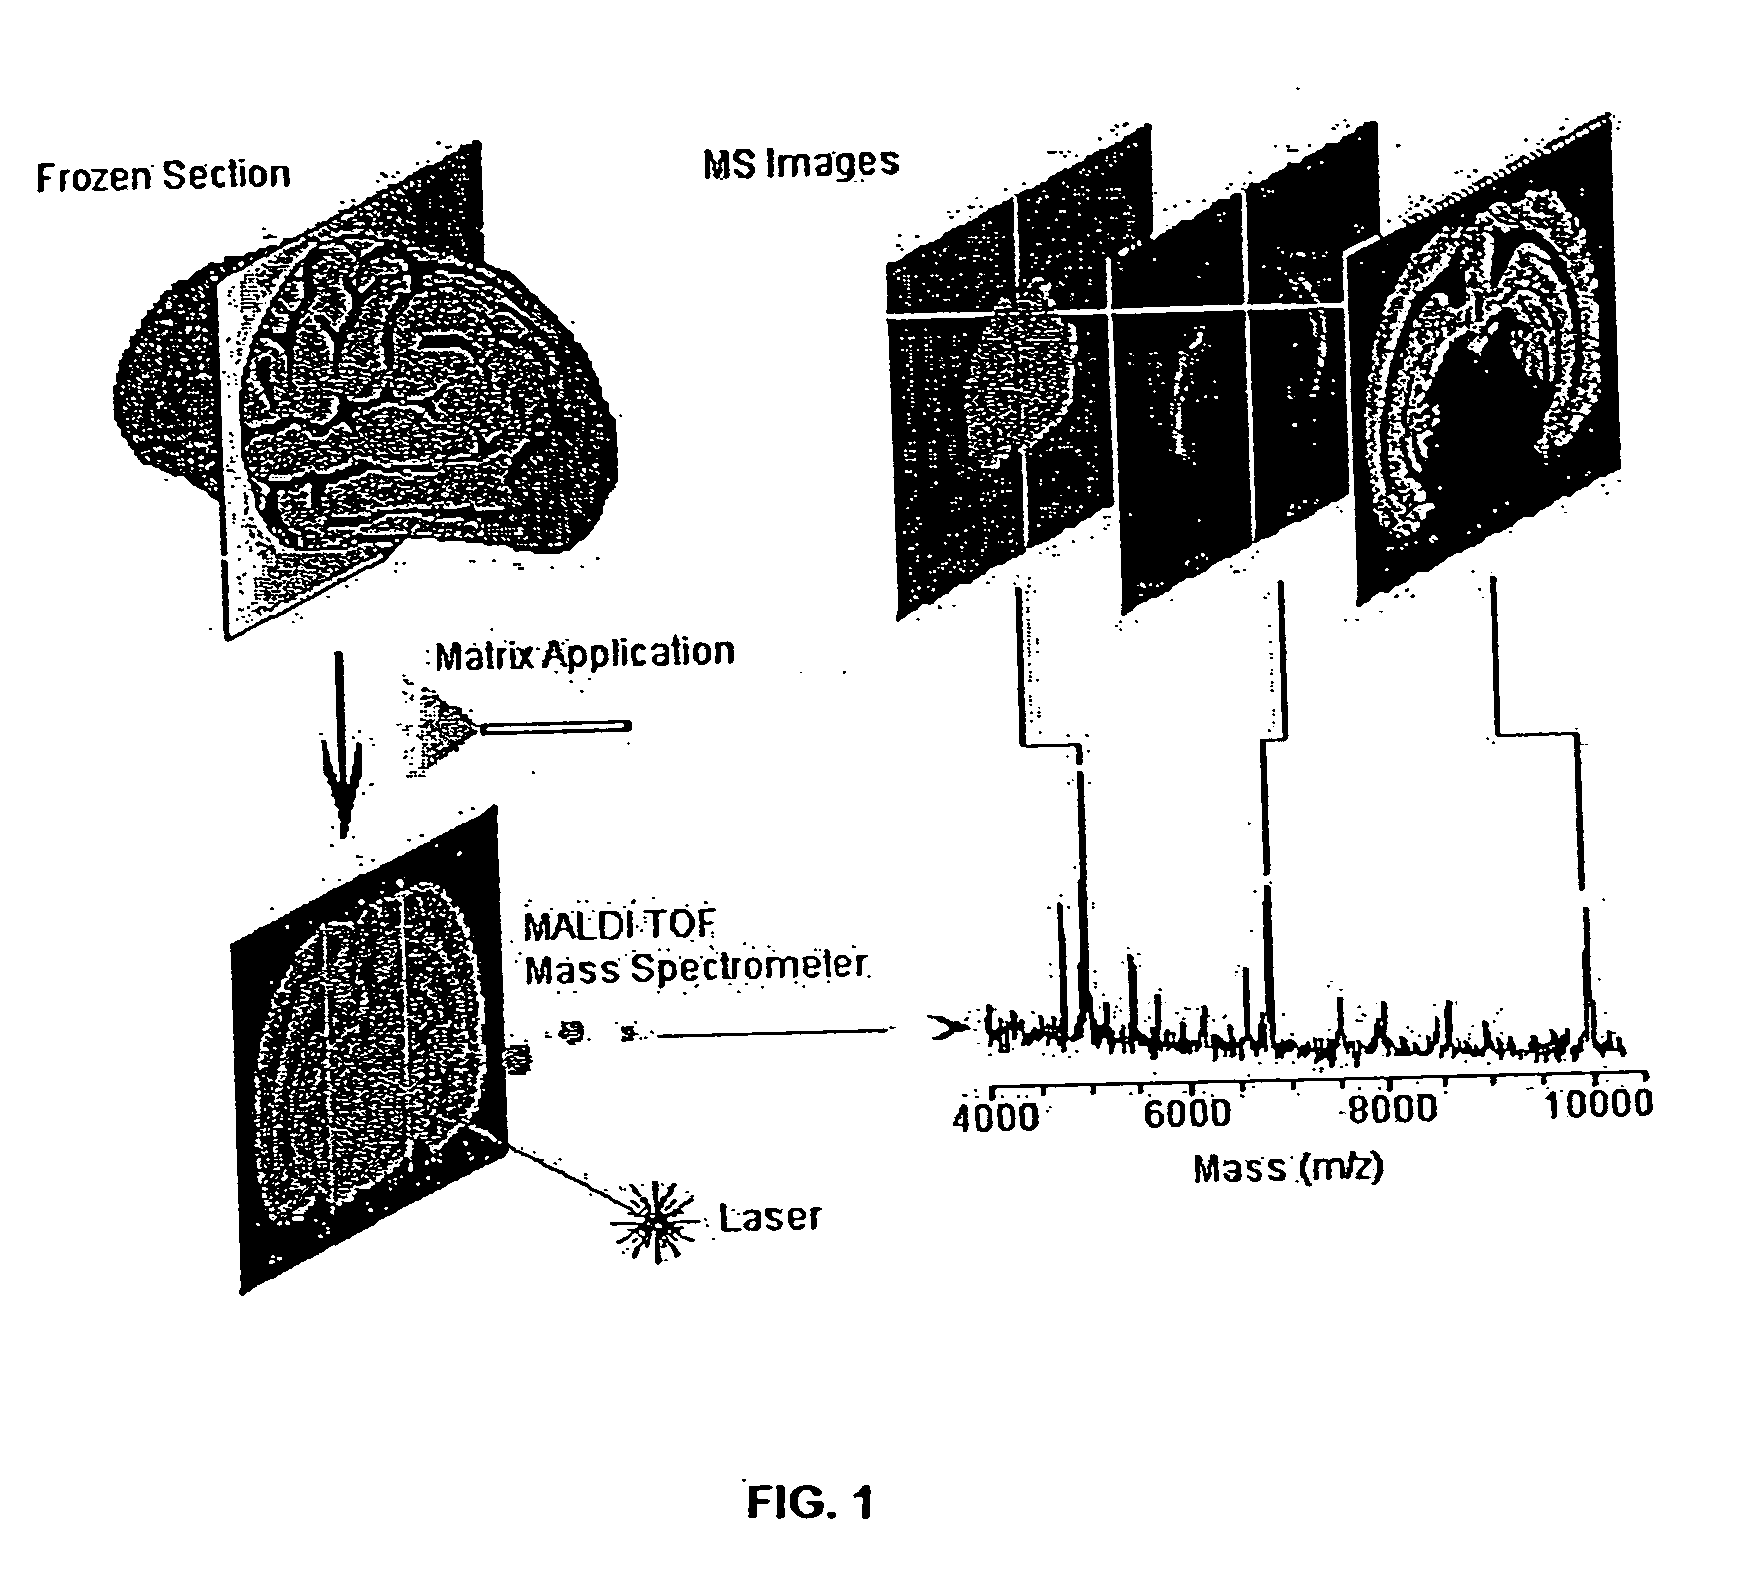 Methods and apparatuses for analyzing biological samples by mass spectrometry